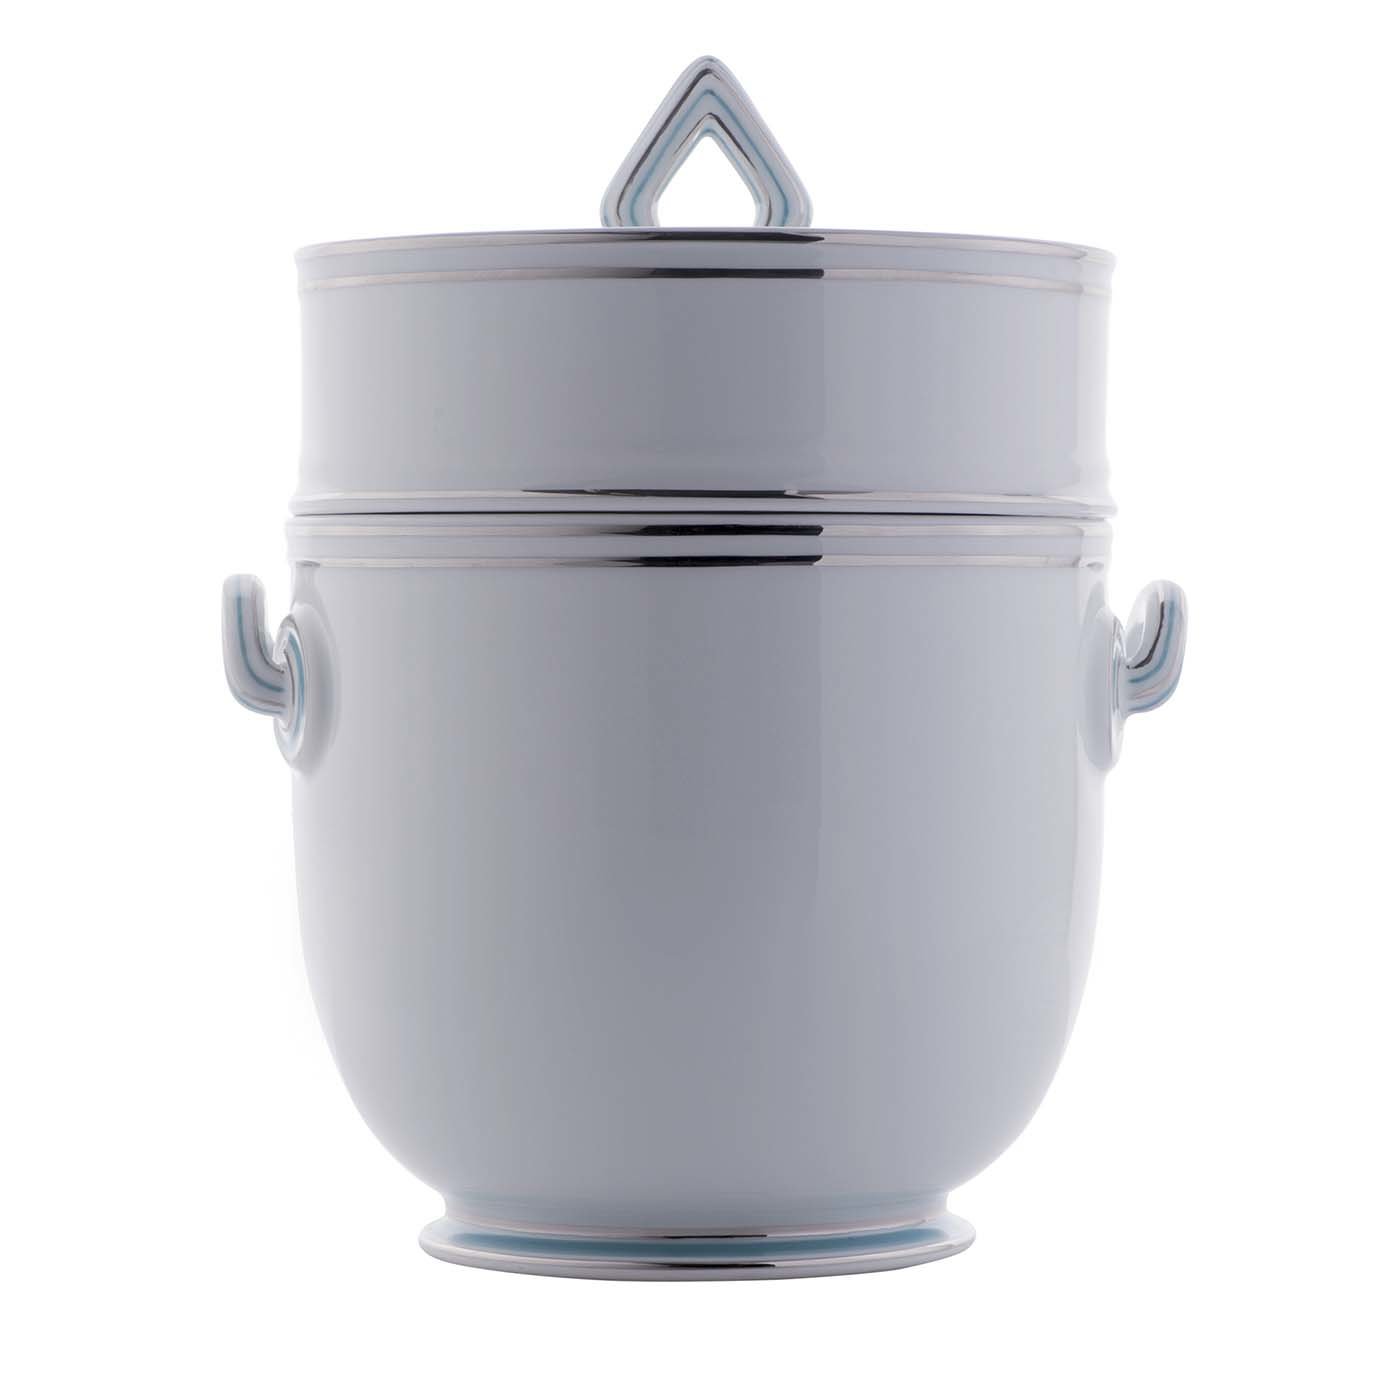 Fili Large Cooler/Ice Bucket with Bowl and Lid - Main view